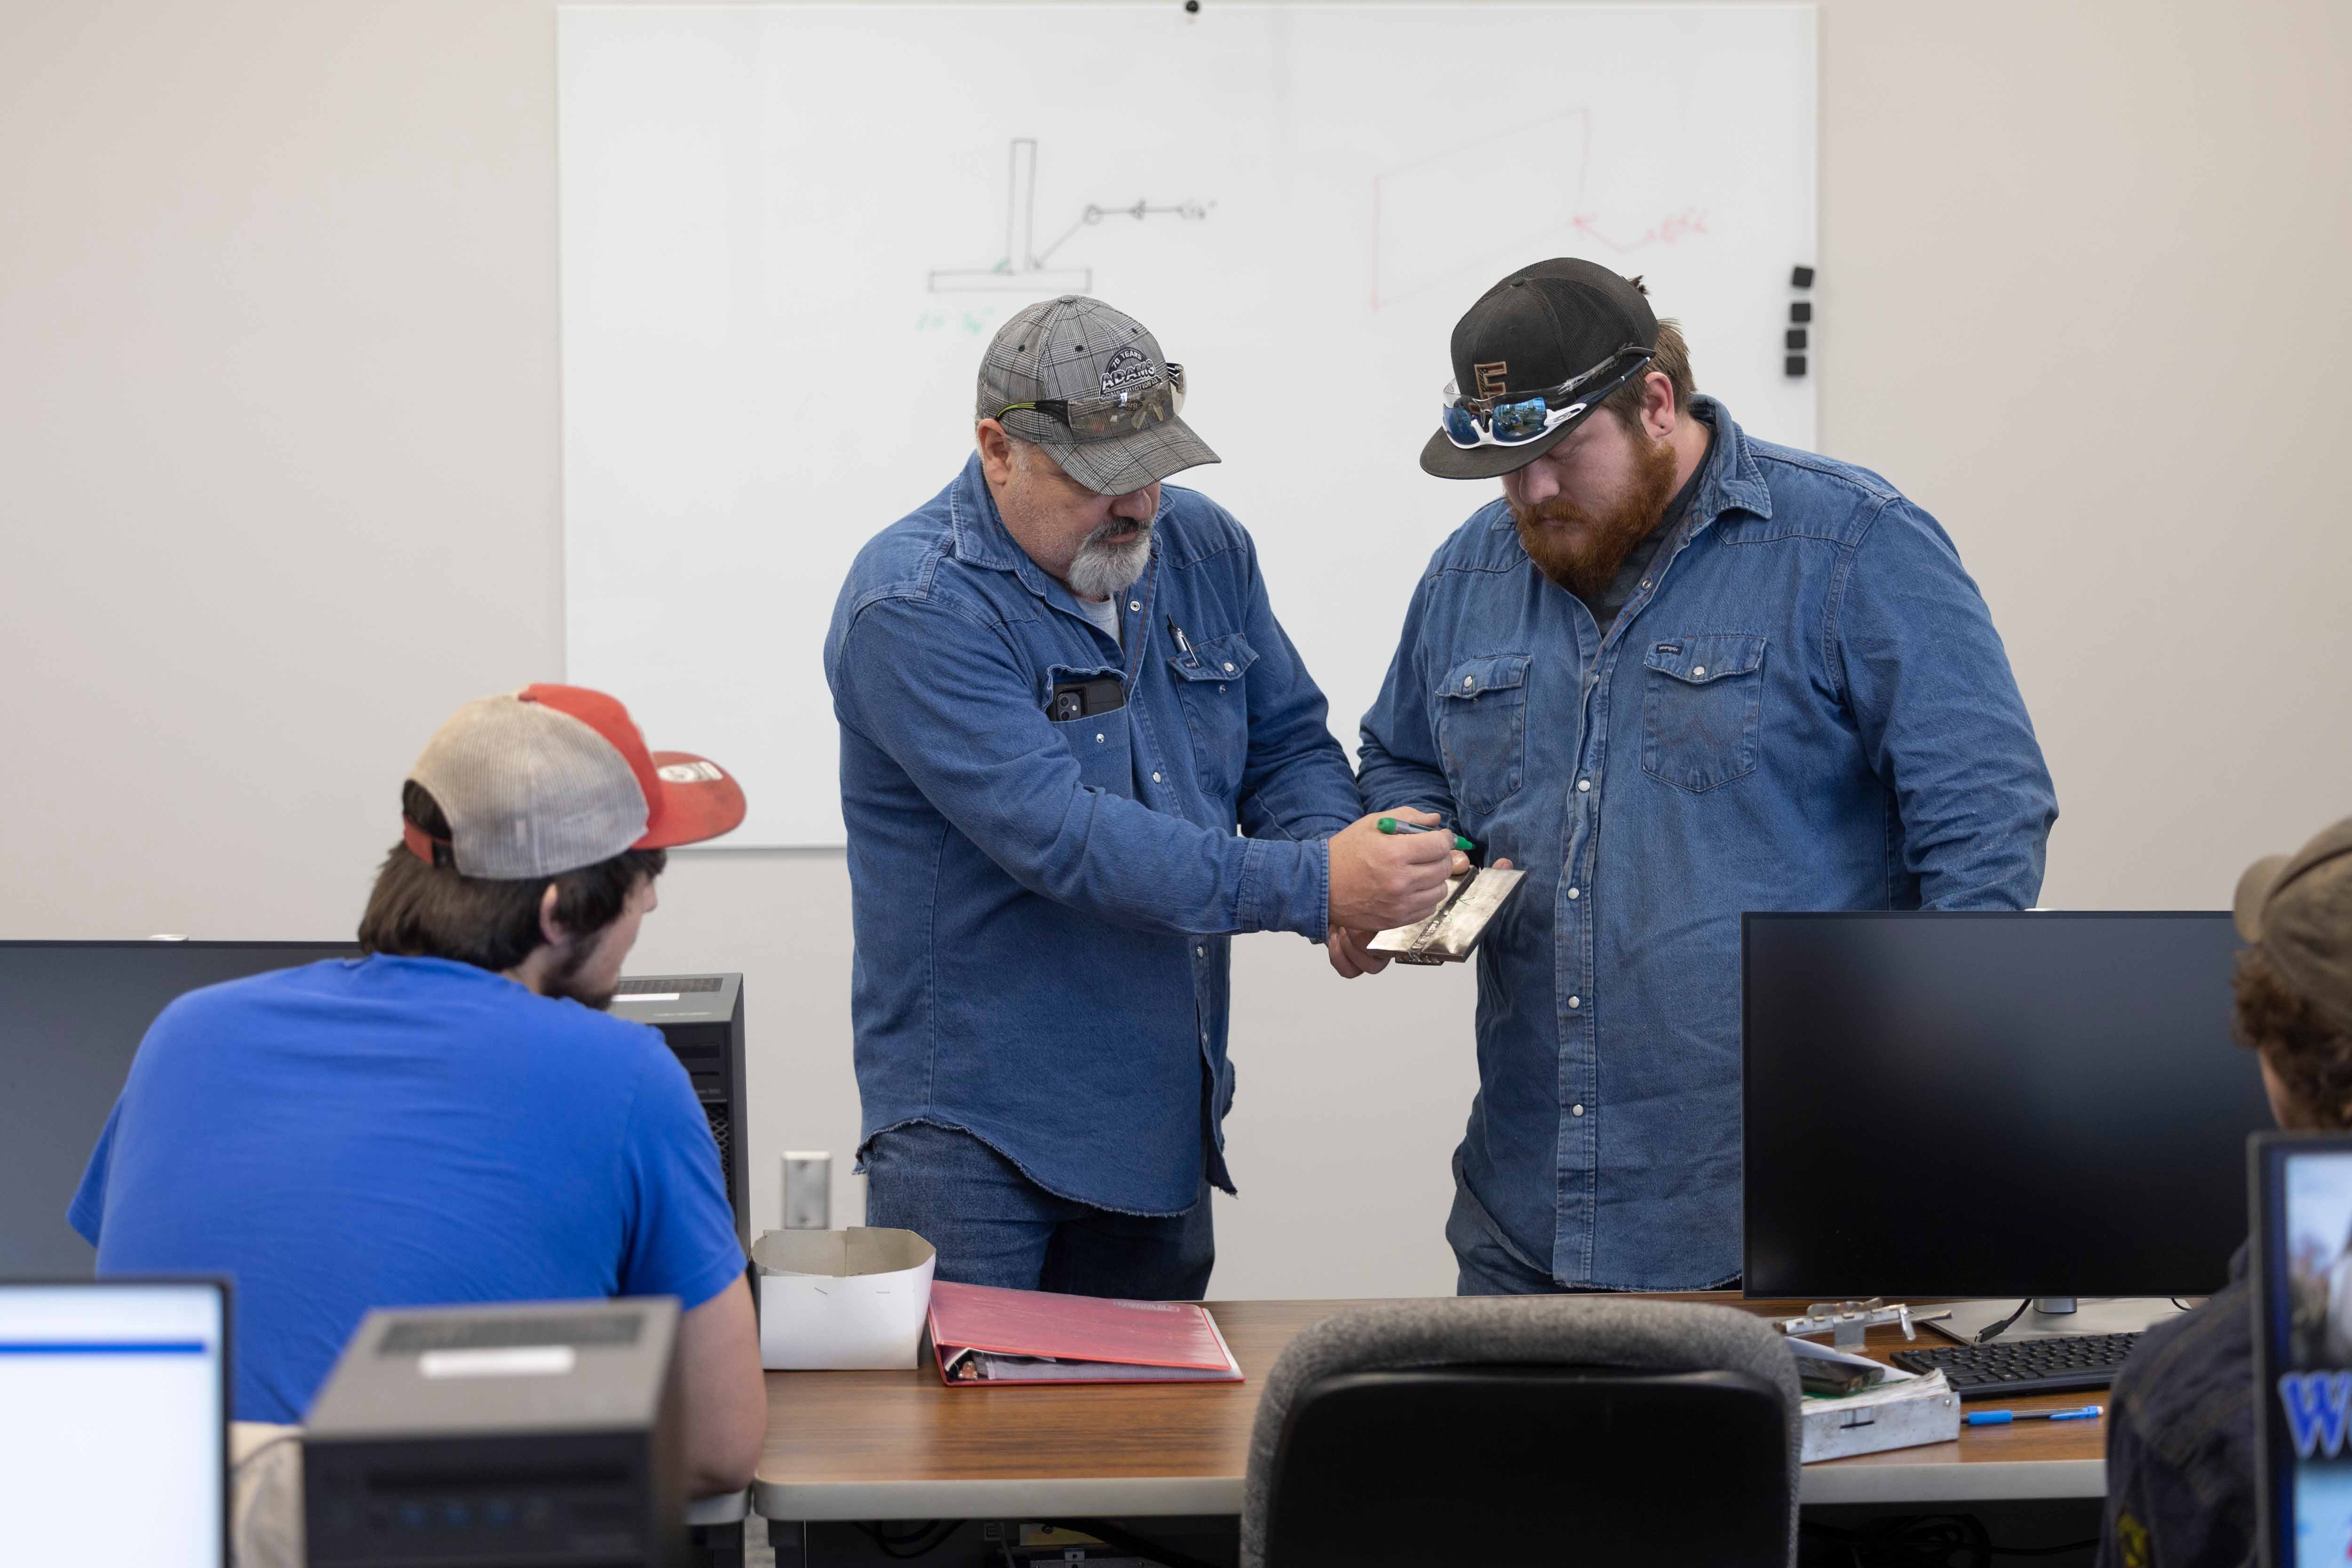 Instructors teaching about welding